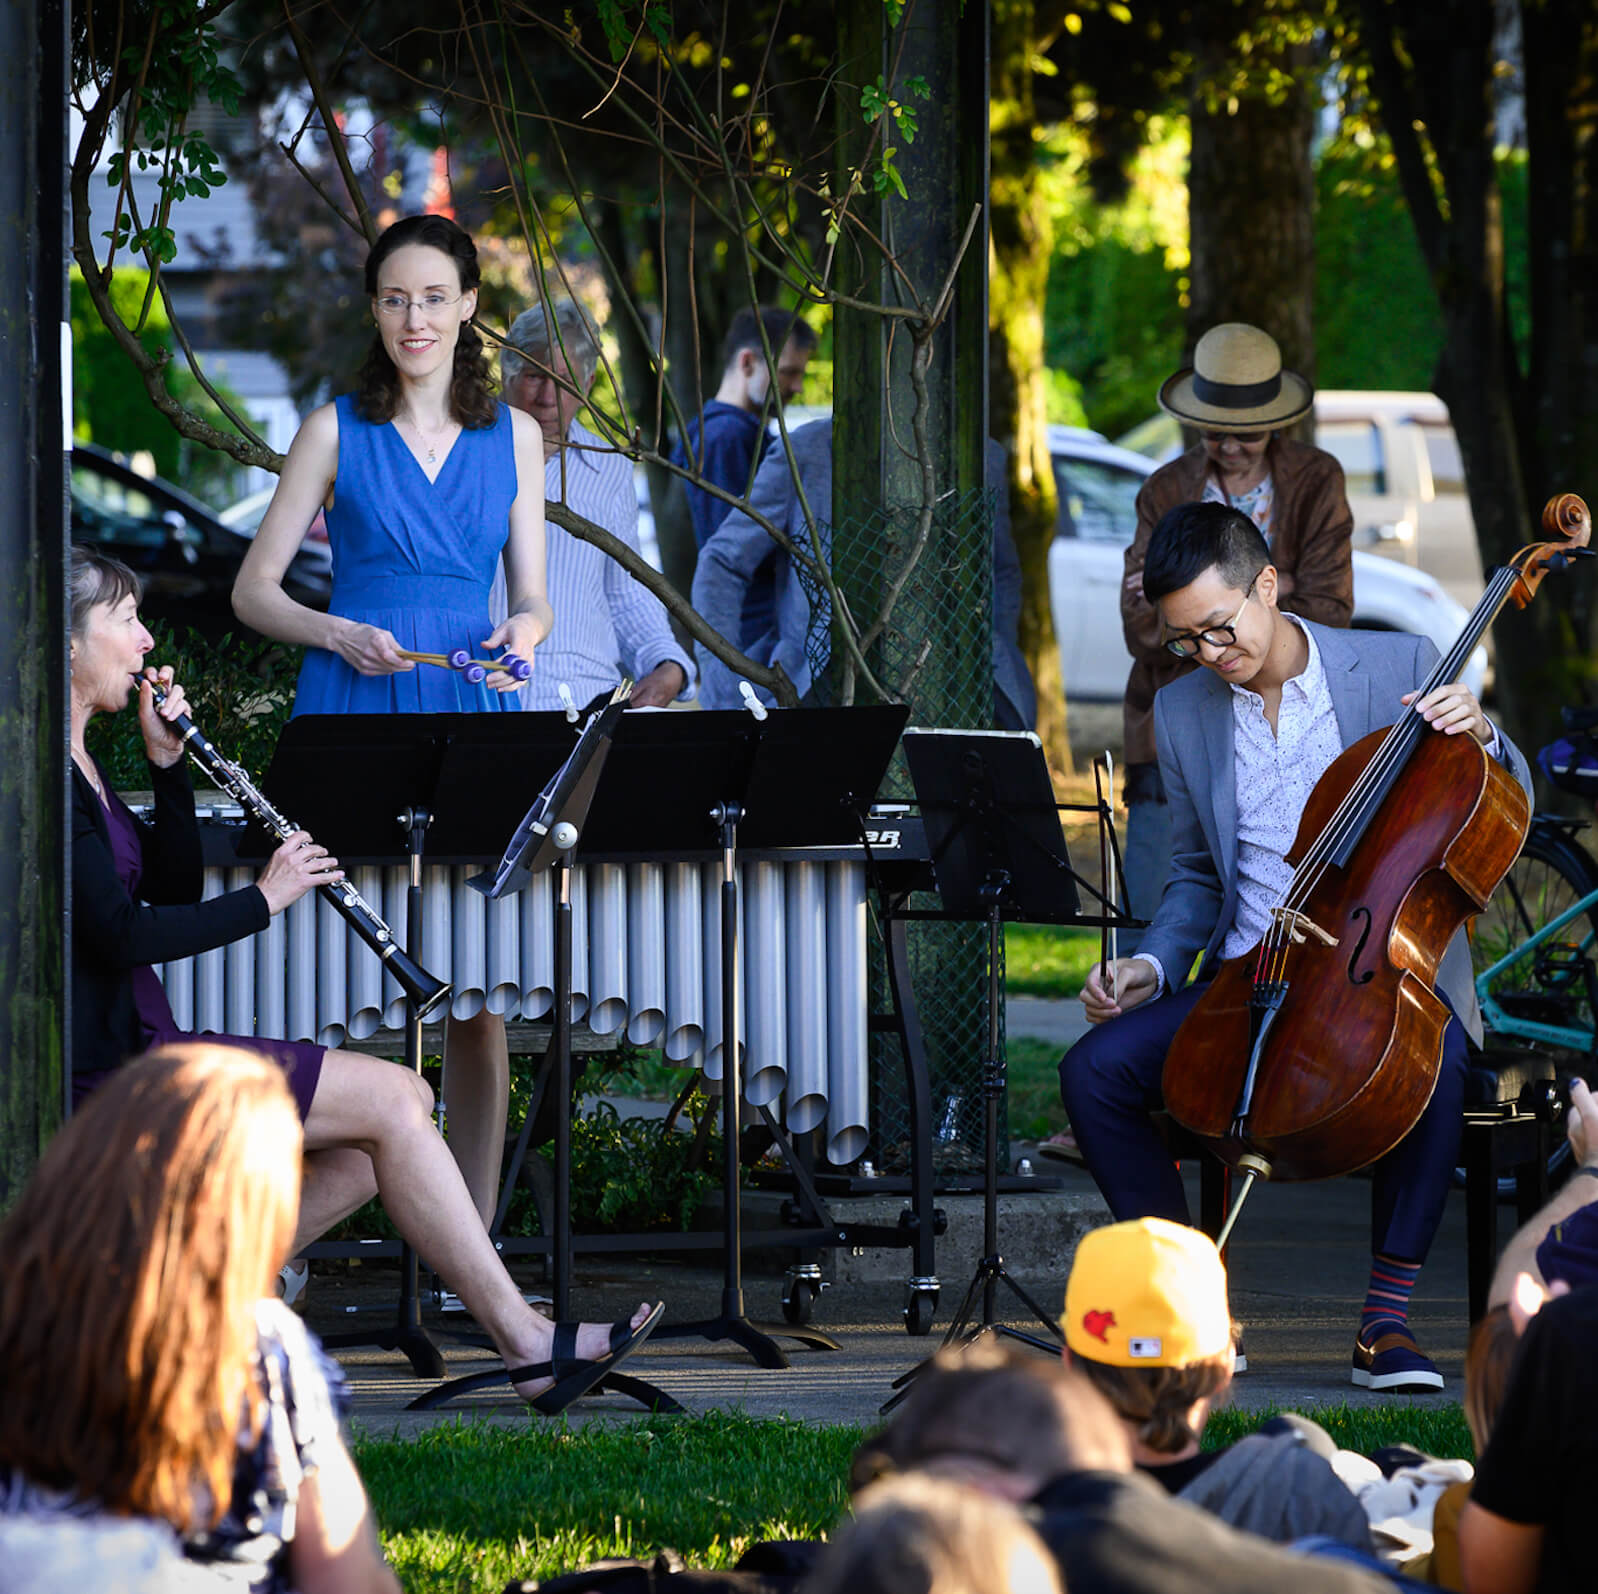 Nicola Everton on clarinet, Katie Rife on vibraphone, and Jonathan Lo on cello playing in the park